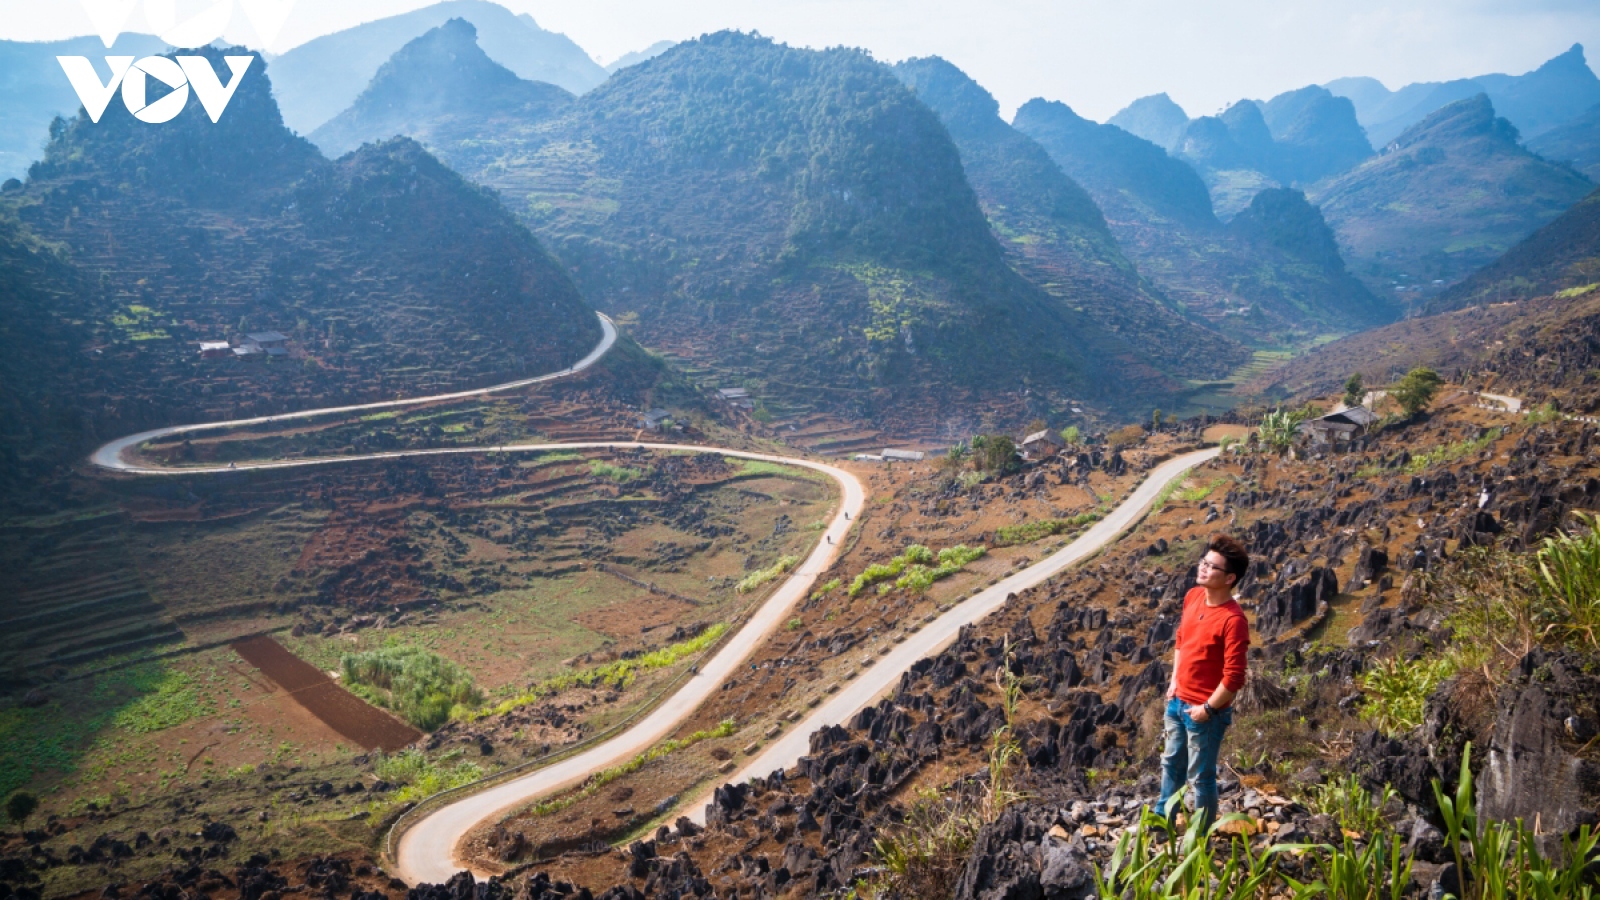 Stunning images of perilous passes in Ha Giang